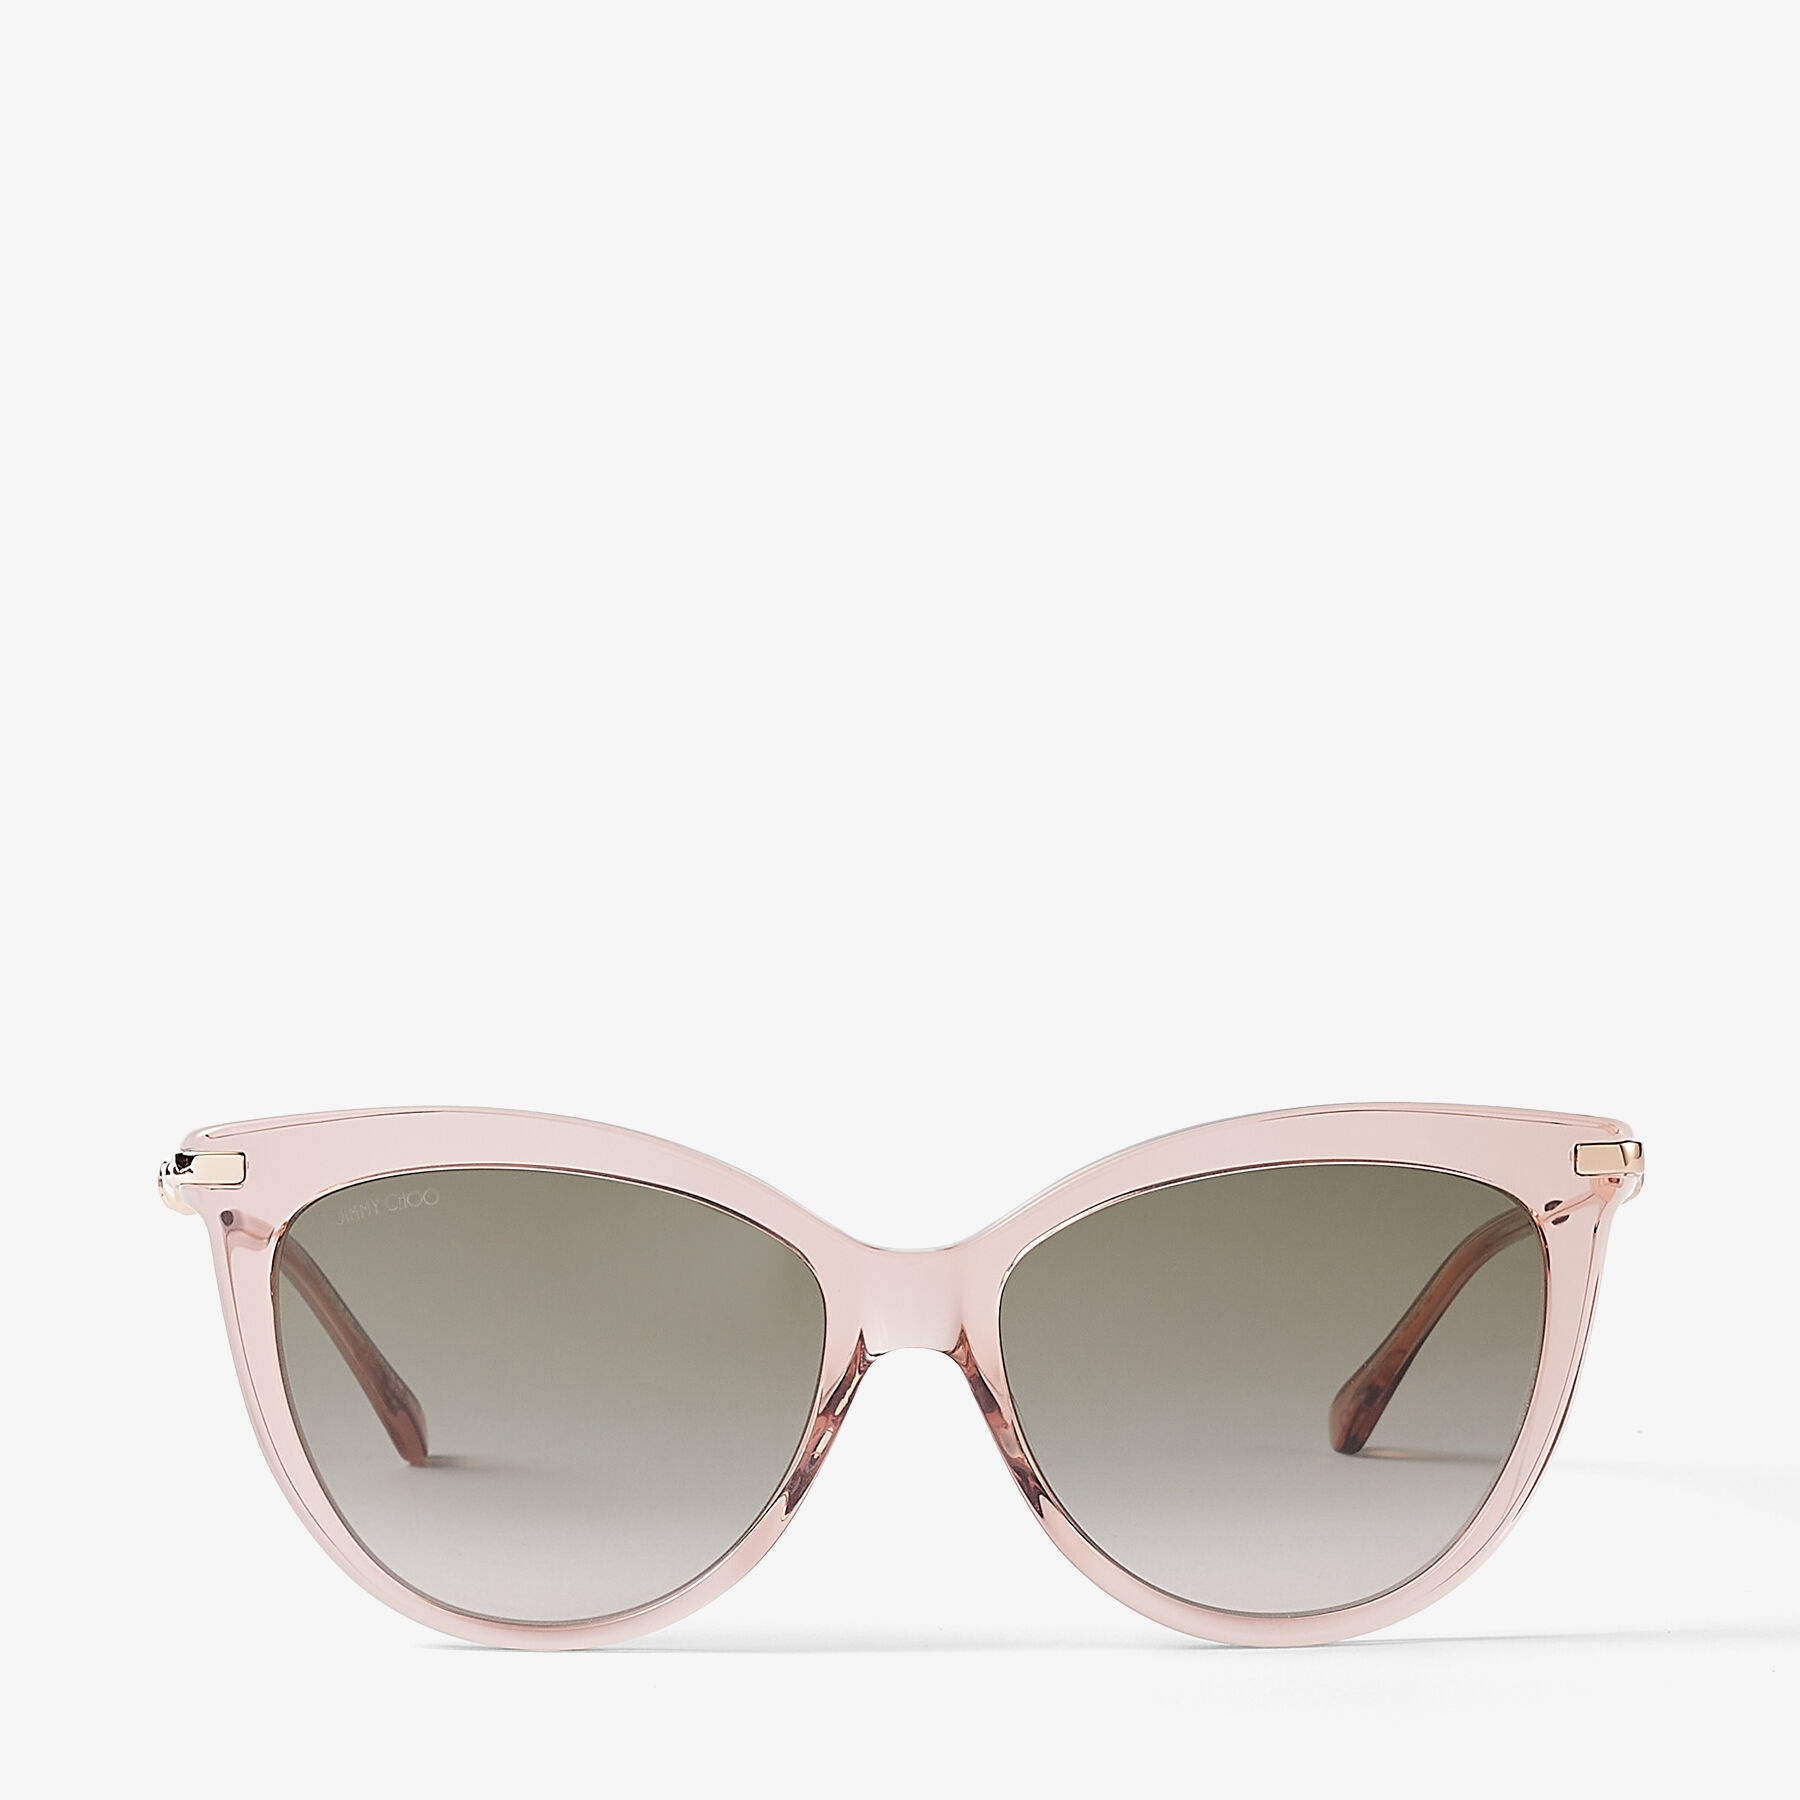 Tinsley/g/s 56
Nude and Copper Gold Cat Eye Sunglasses with Pearls - 1